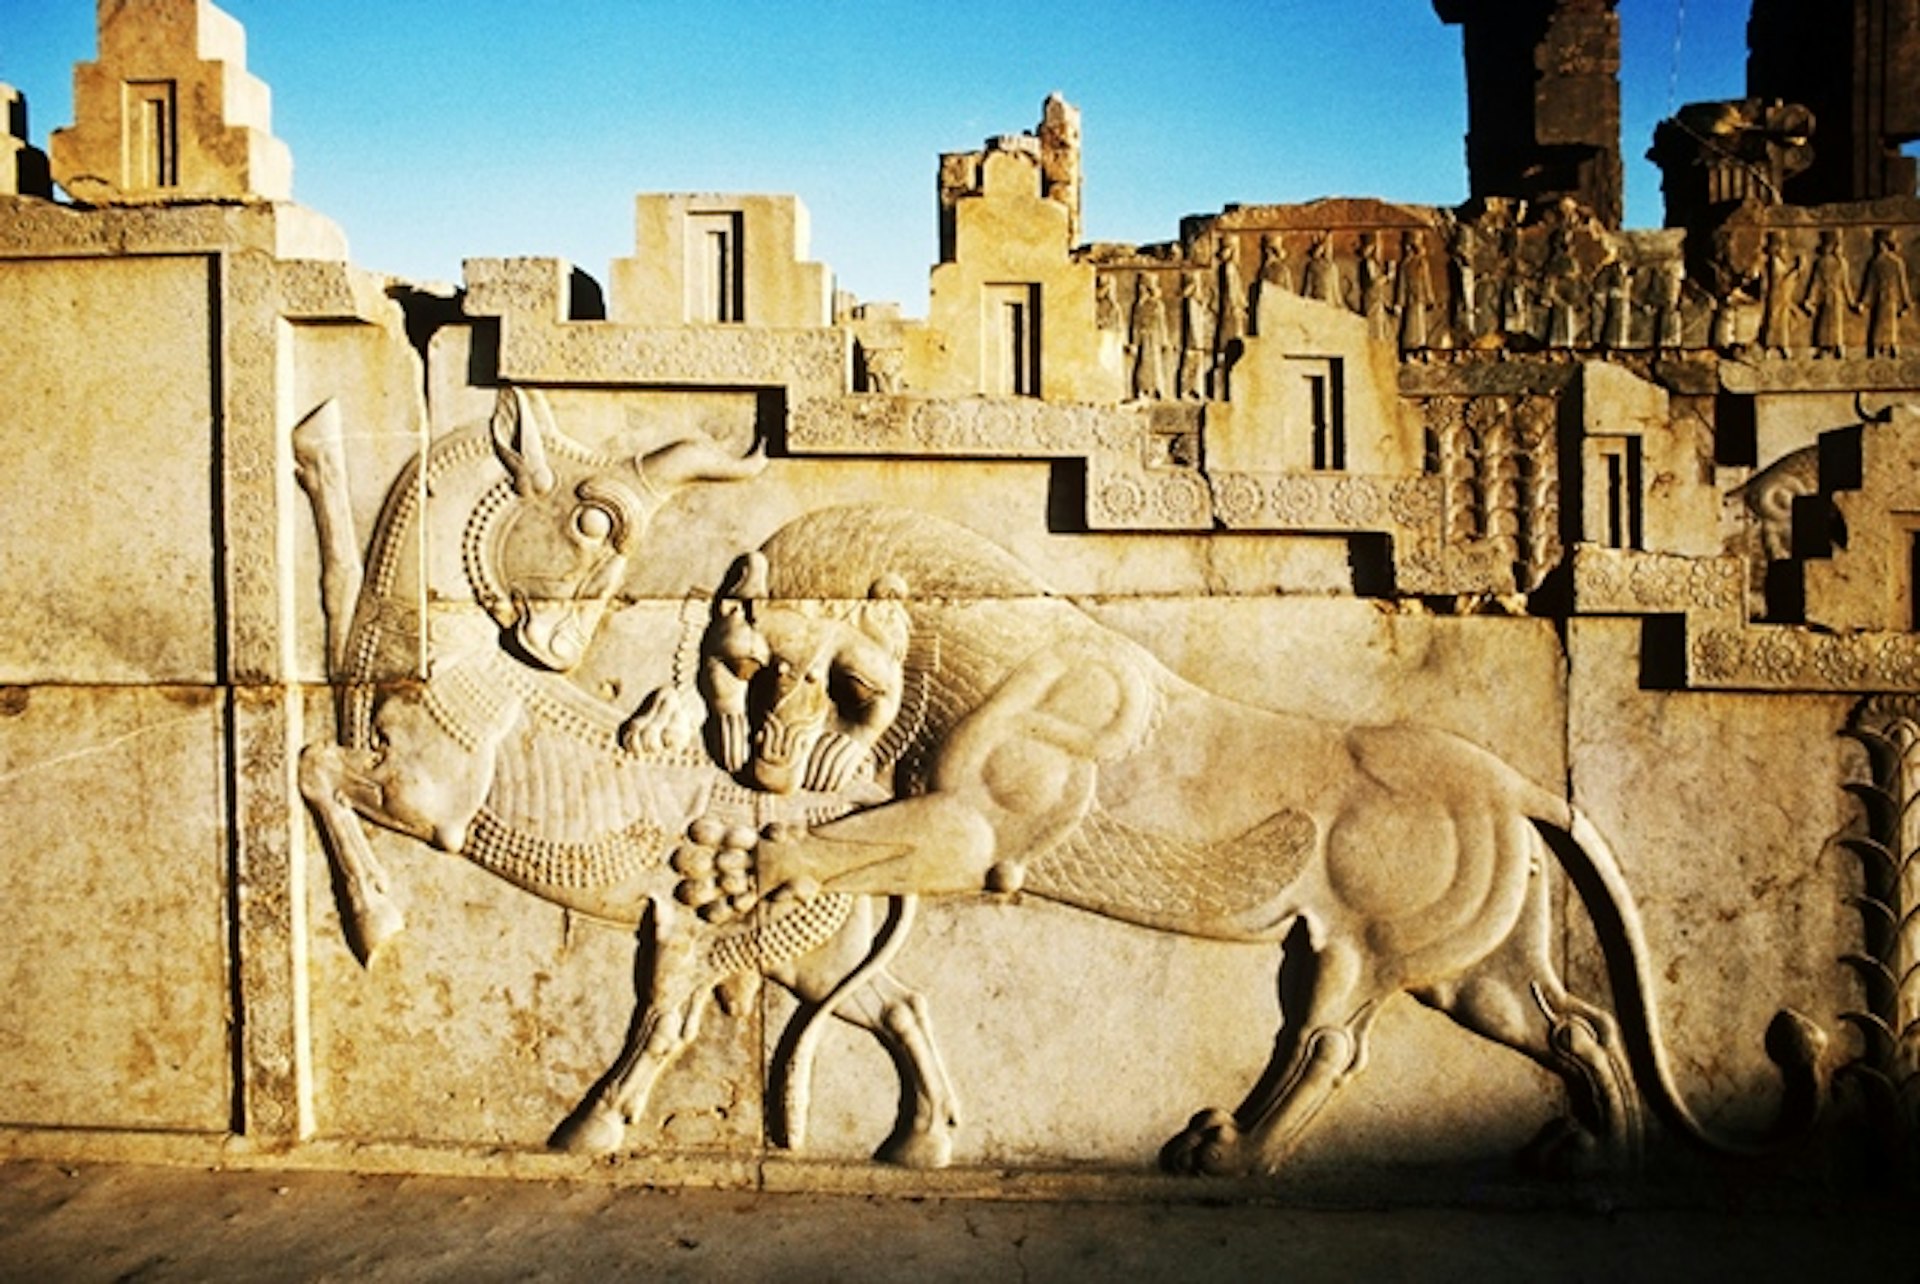 A relief of a lion attacking a deer on the walls of the Apadana Palace. Image by Getty/science Source/ Farrell Grehan